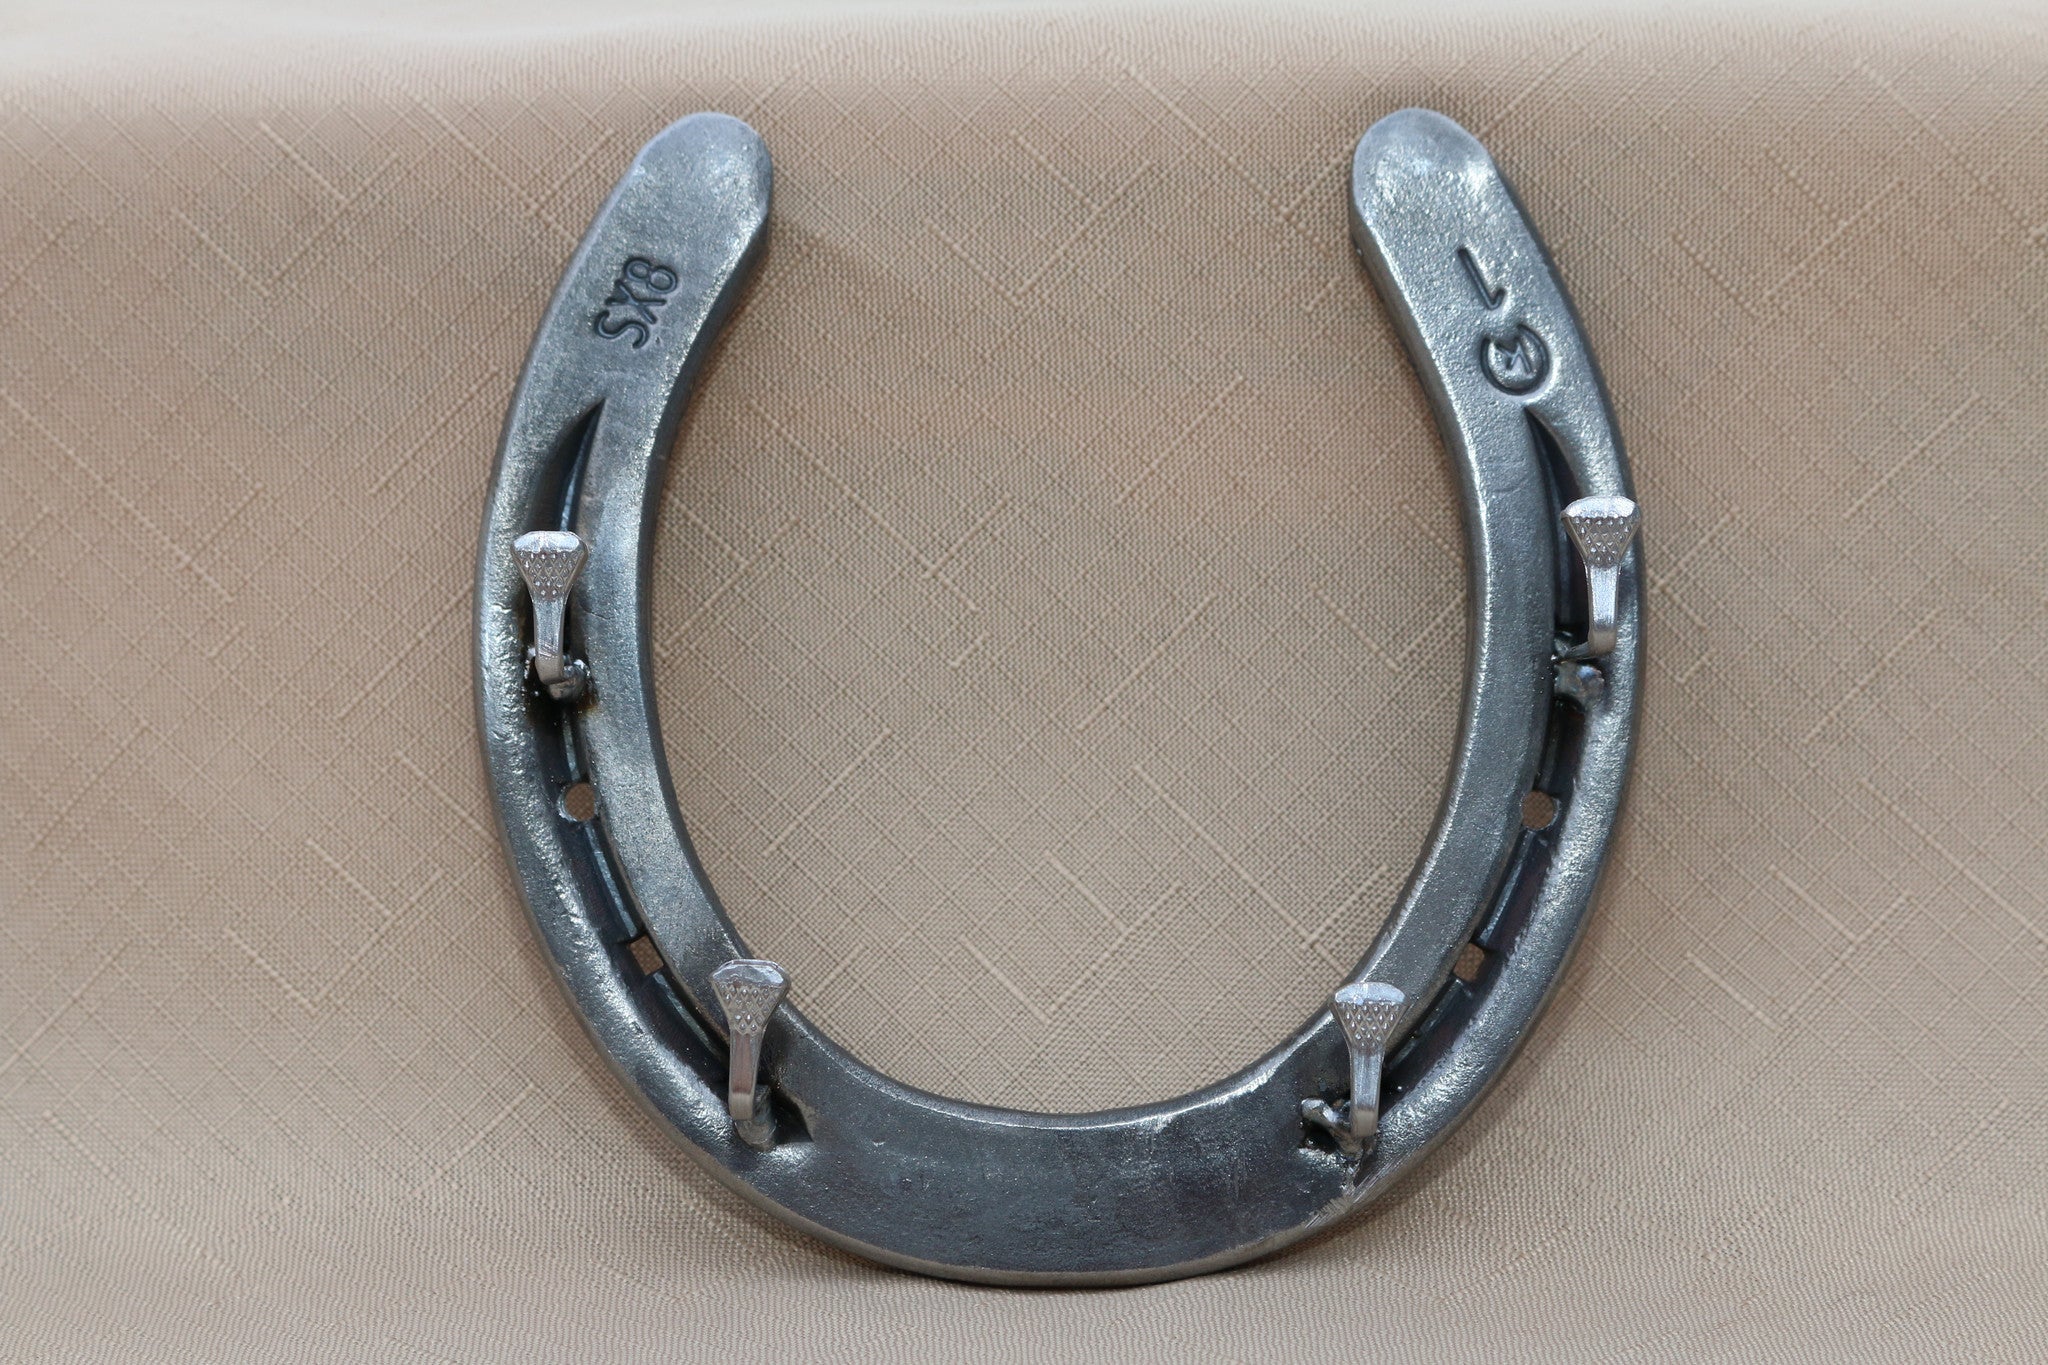 New and used Horseshoes for sale | Facebook Marketplace | Facebook